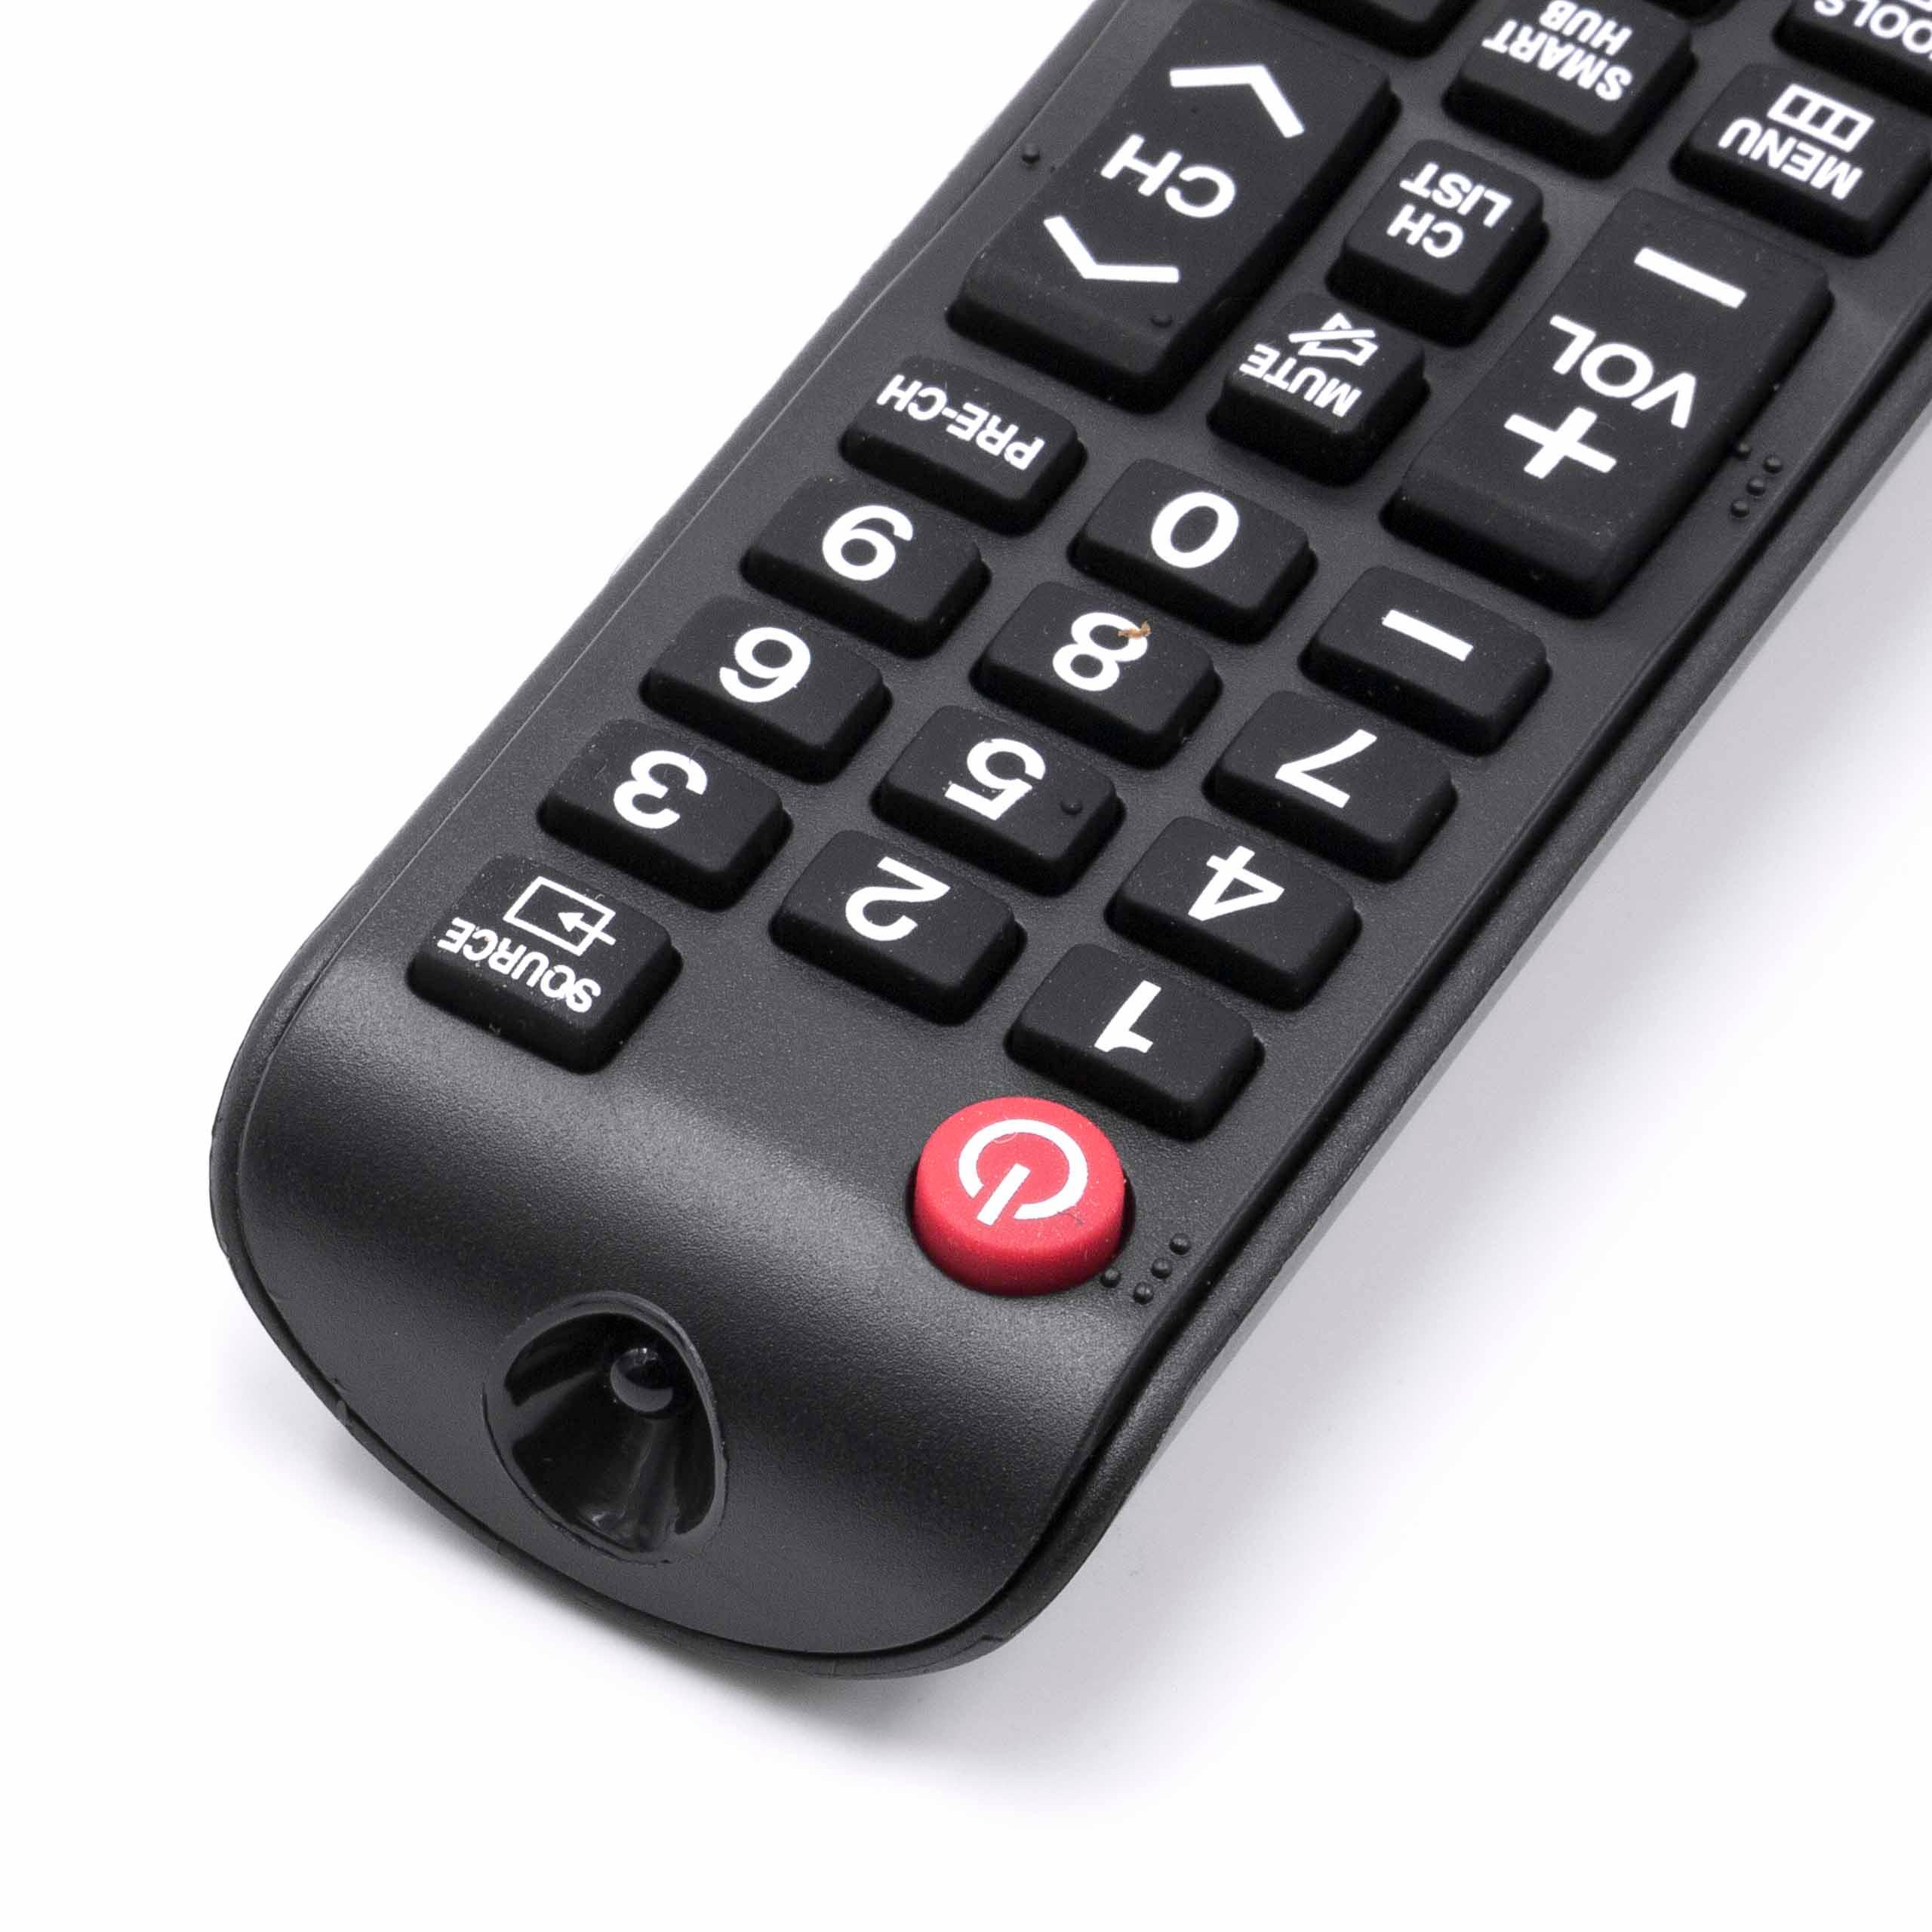 Remote Control replaces Samsung BN59-01199K, BN59-01199F for Samsung TV